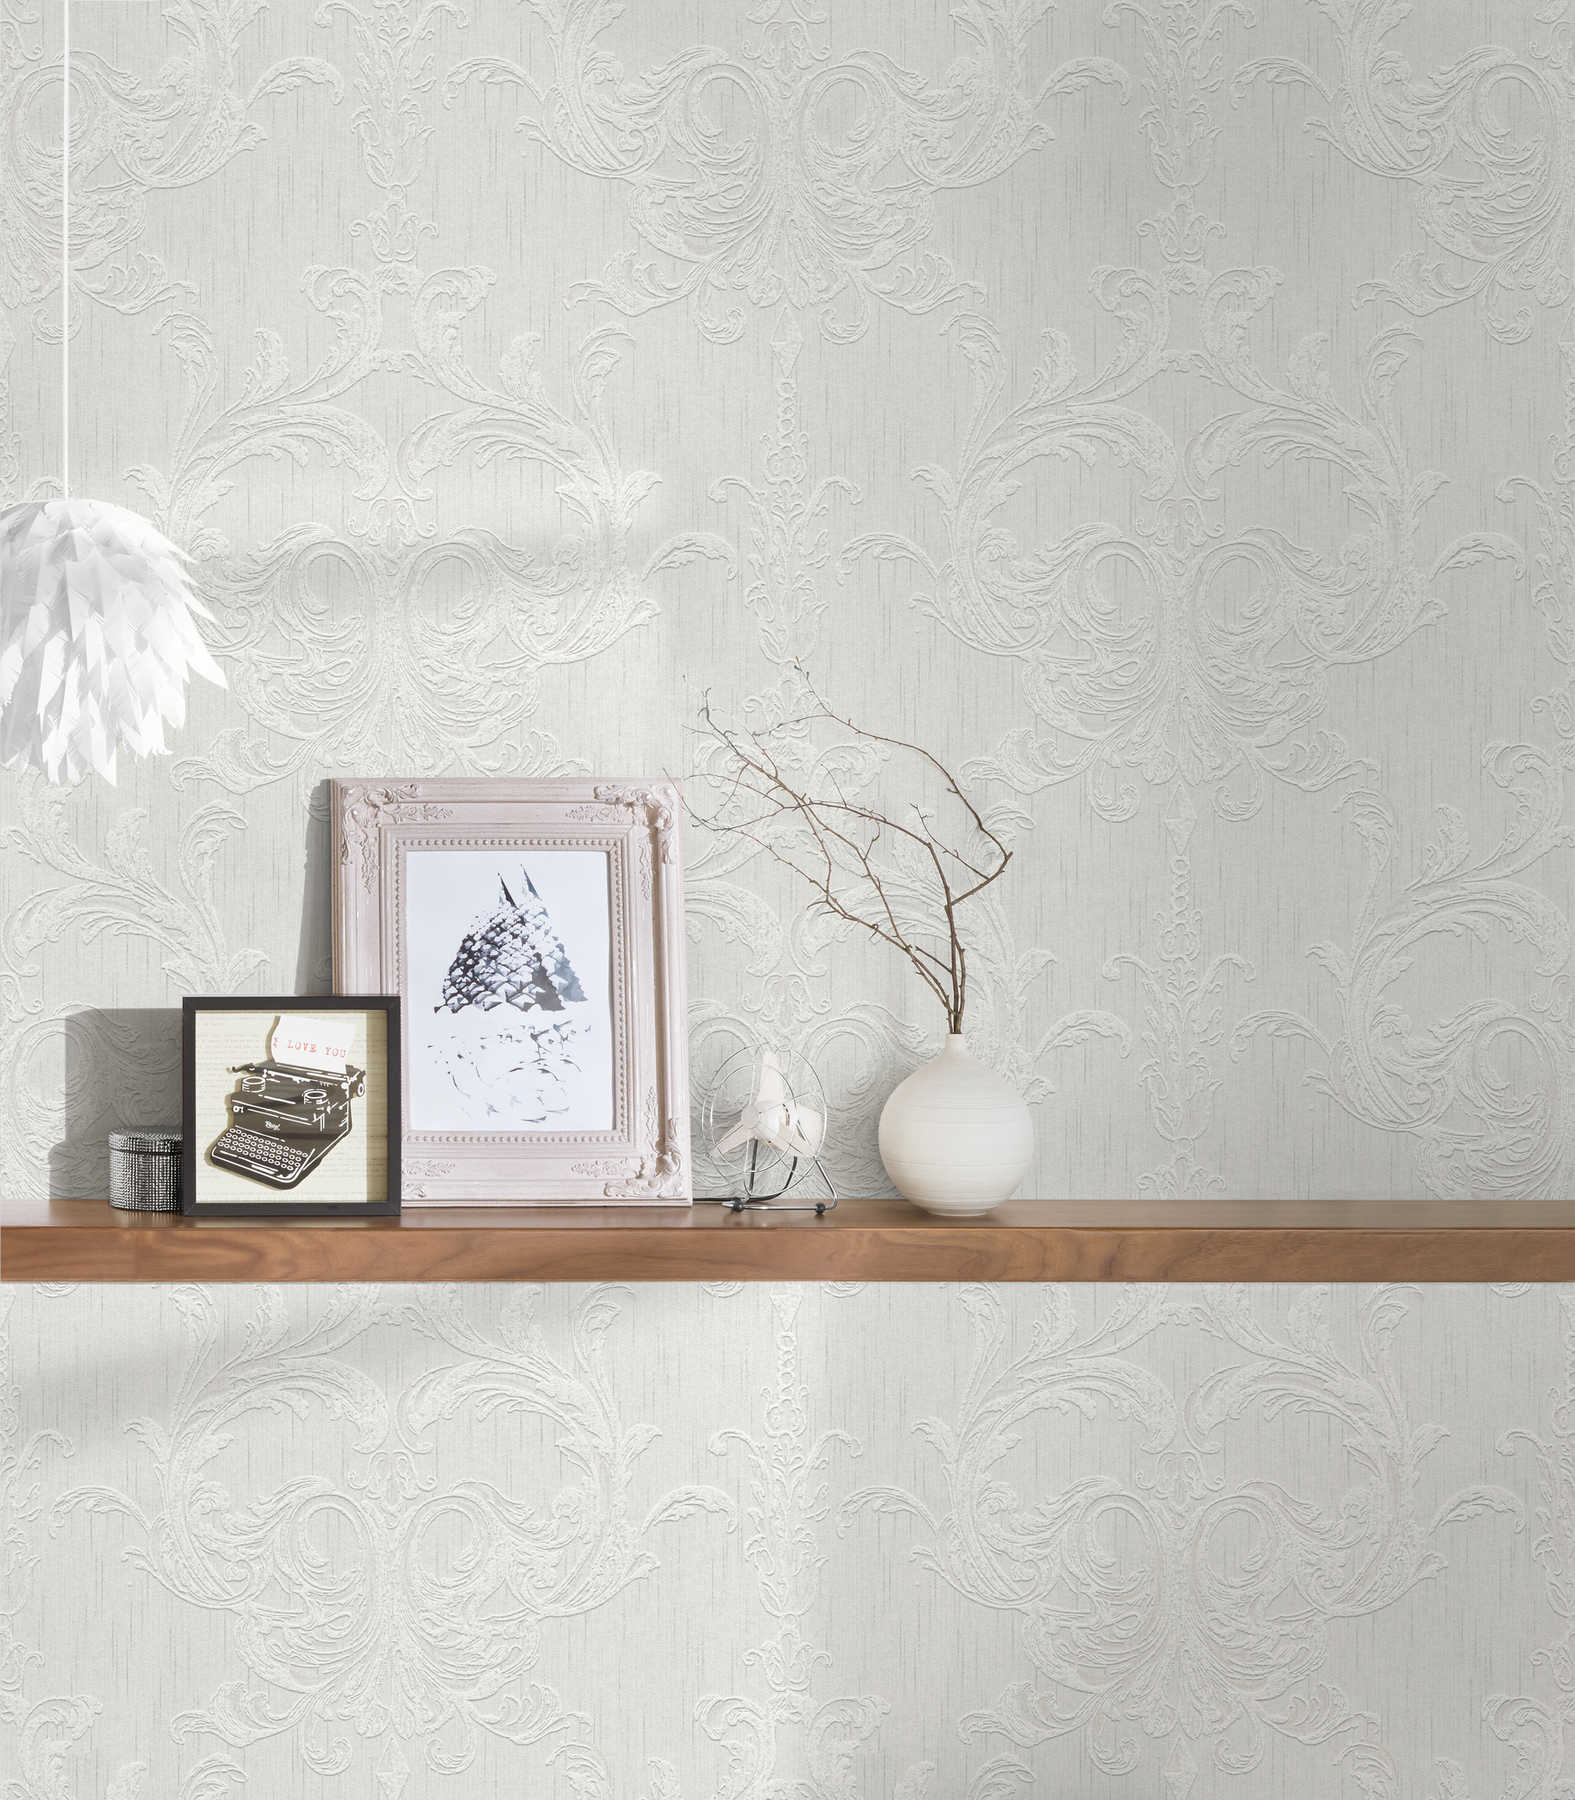             Ornamental wallpaper with stucco design & plaster look - grey, white
        